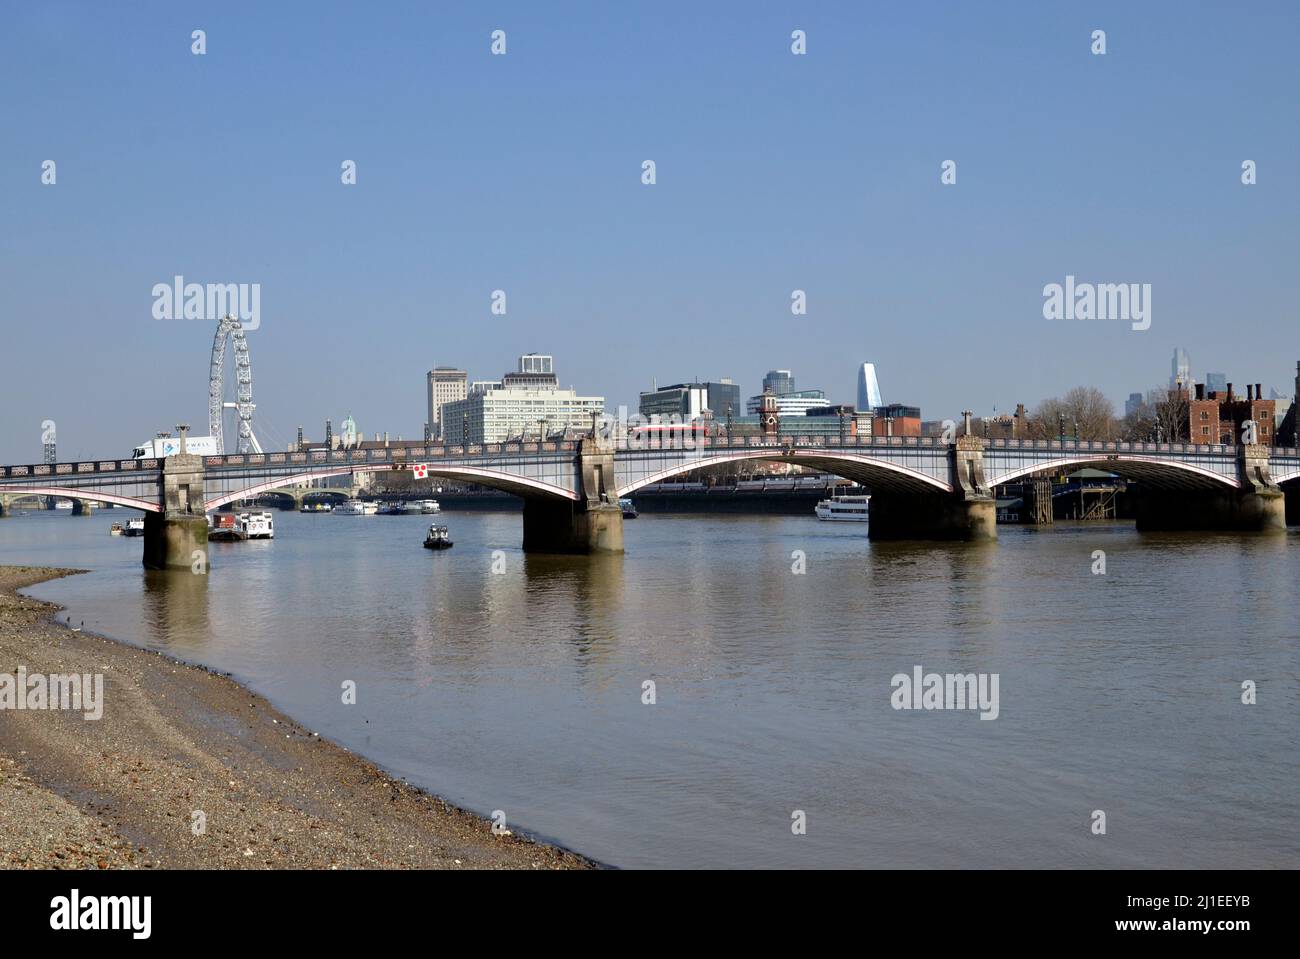 Lambeth Bridge, between Westminster and Lambeth on the River Thames in London Stock Photo